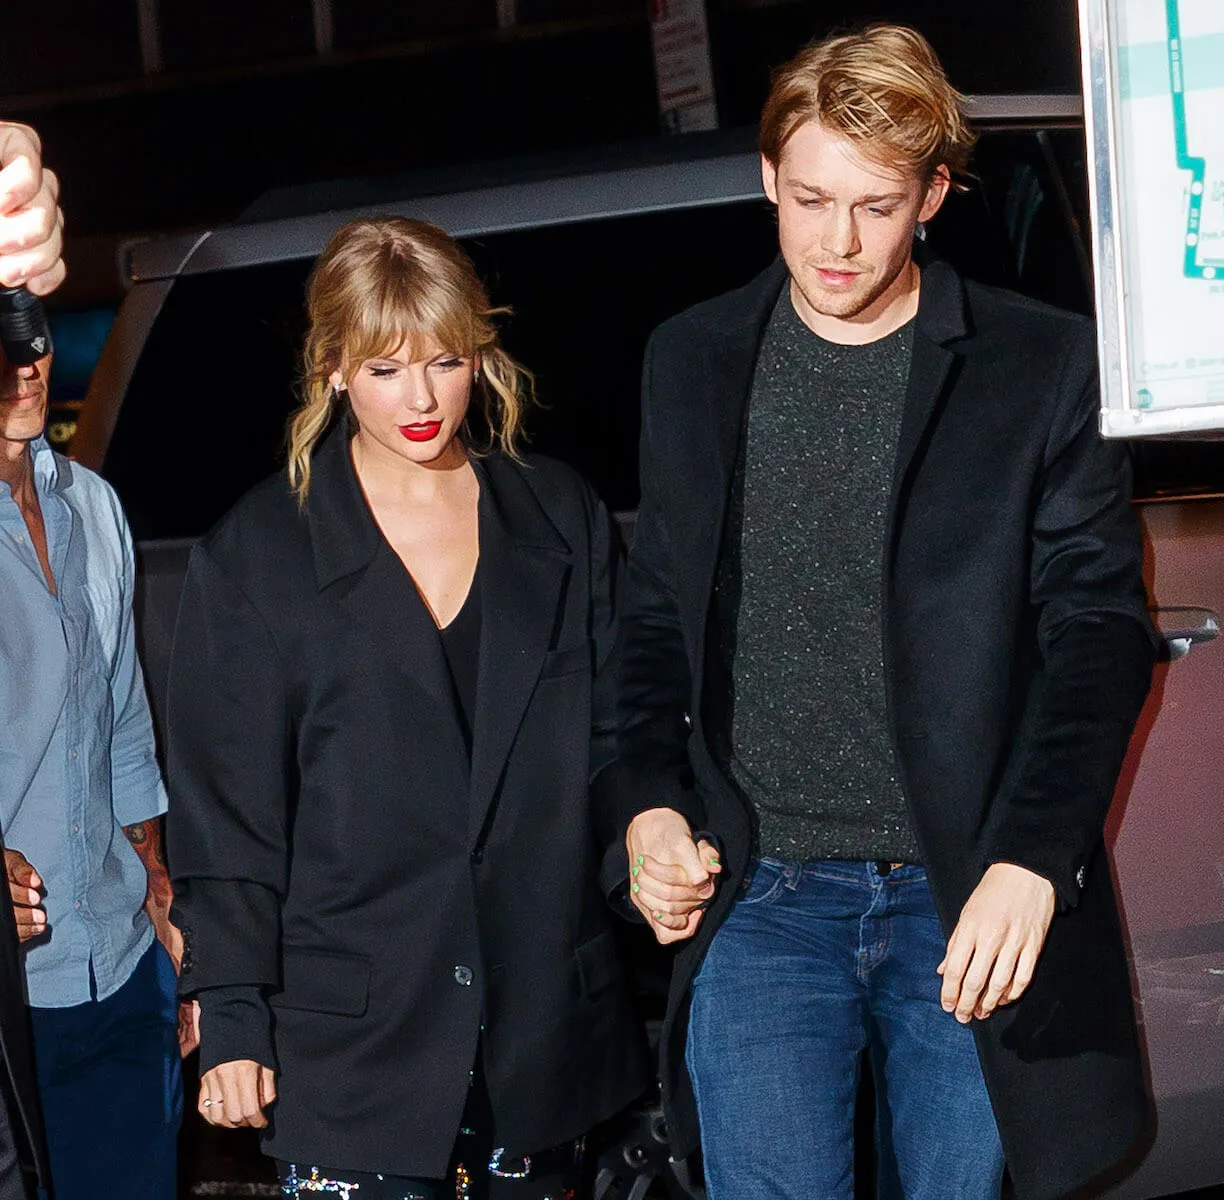 Taylor Swift and Joe Alwyn holding hands and walking at night in 2019